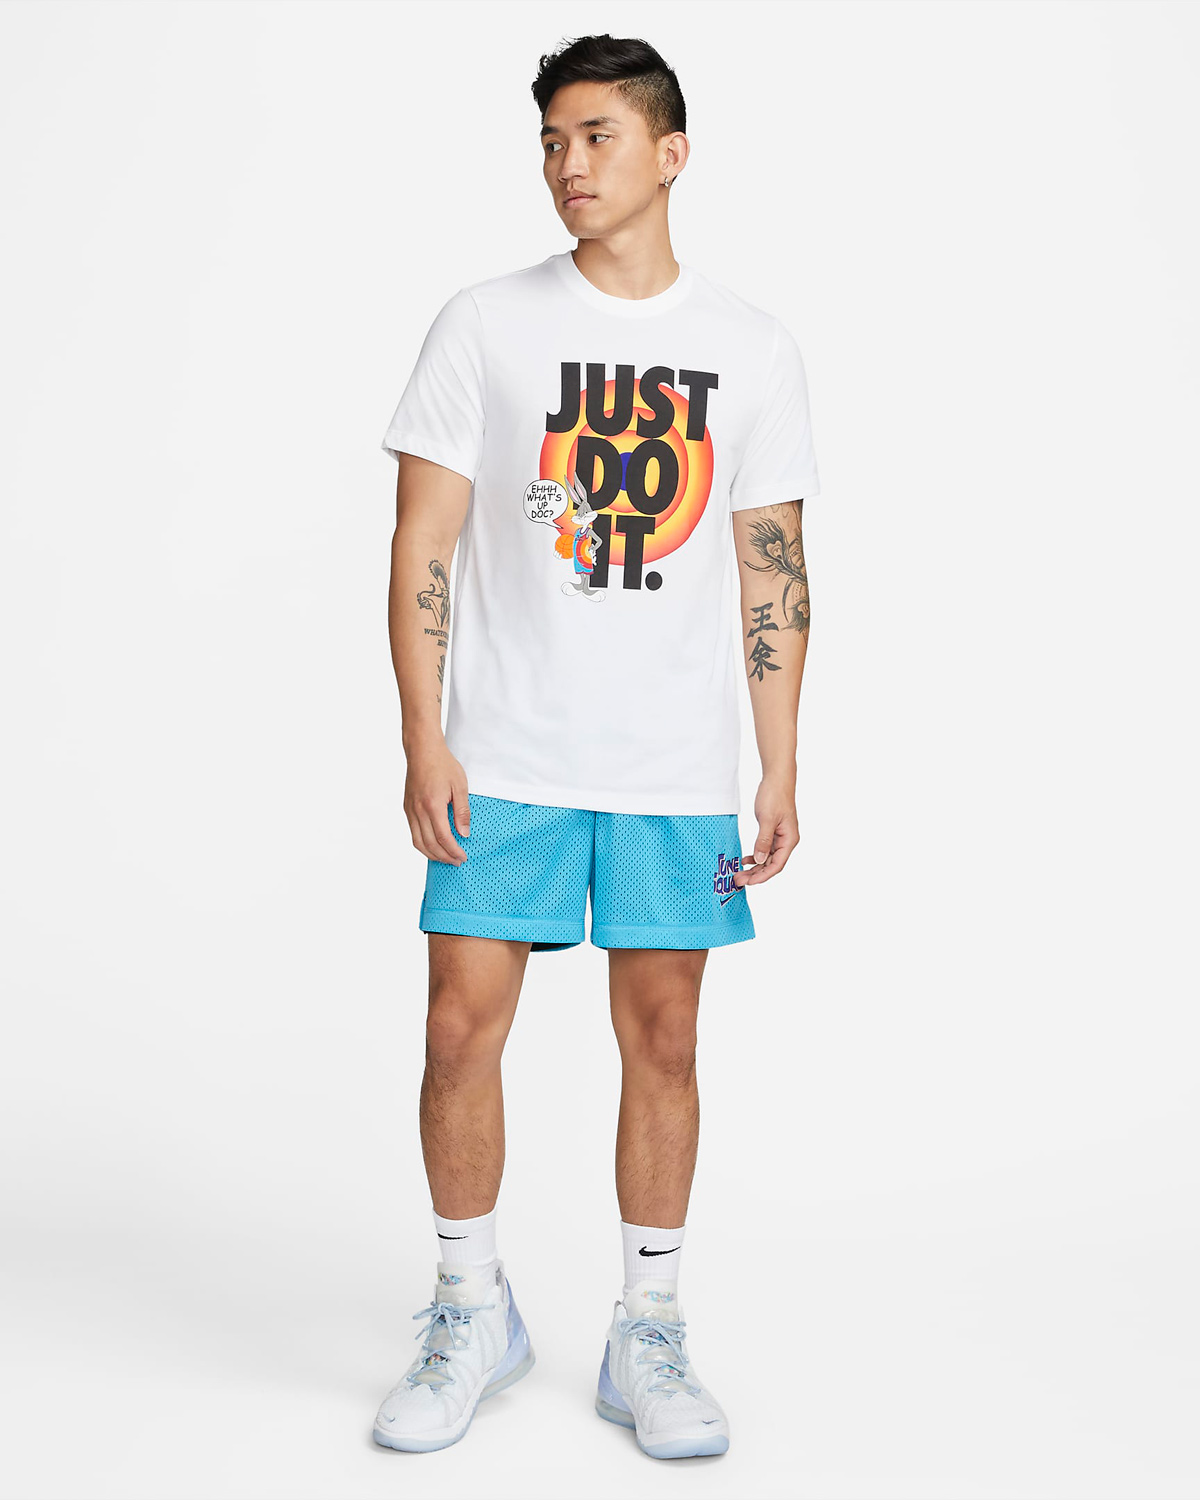 nike-space-jam-a-new-legacy-jdi-just-do-it-shirt-white-3